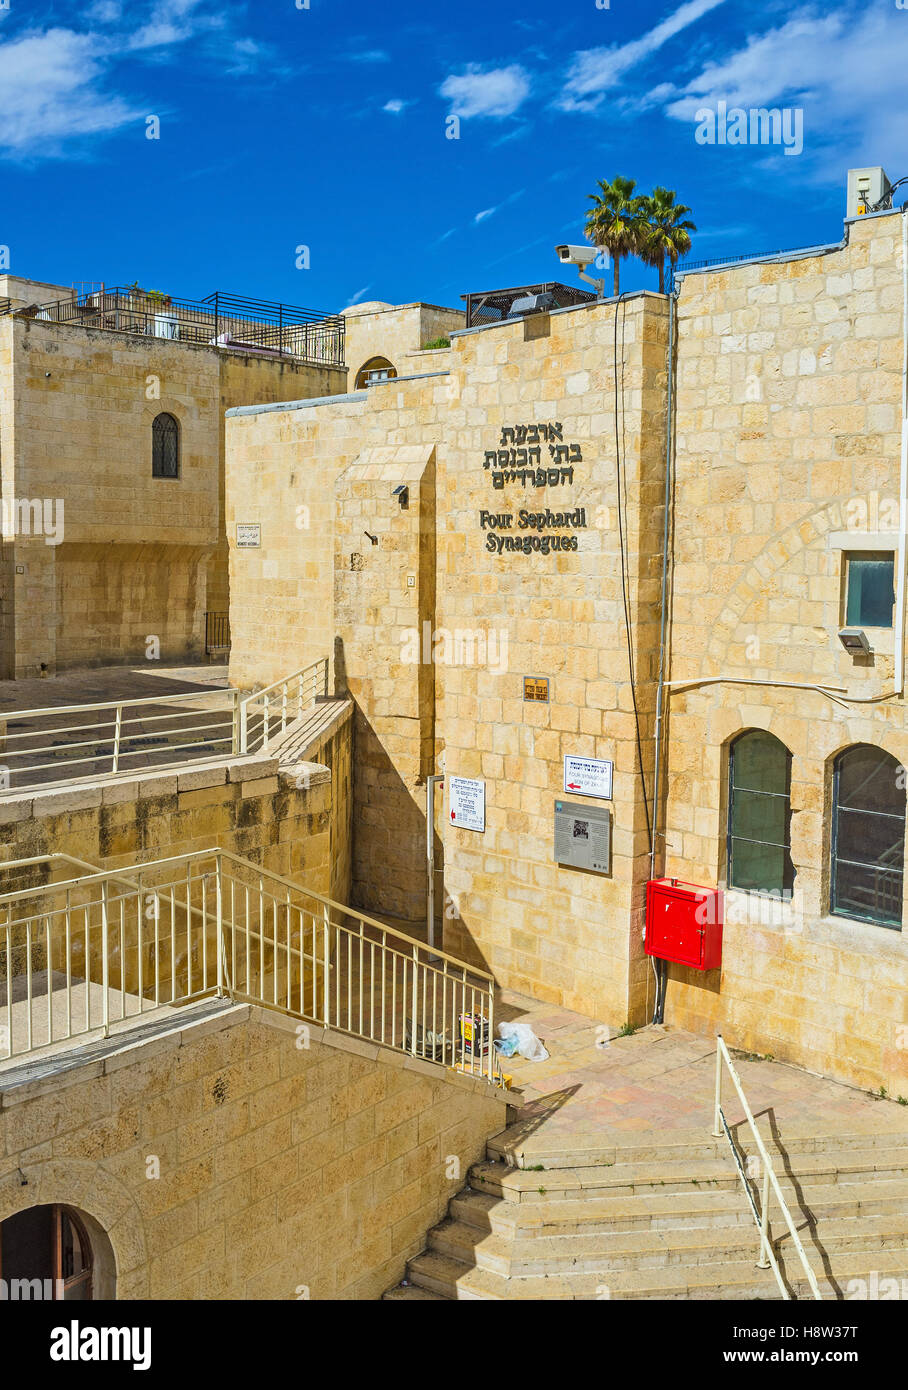 Four Sephardic Synagogues complex is the heart of Jewish Quarter and one of the most notable city landmarks Stock Photo